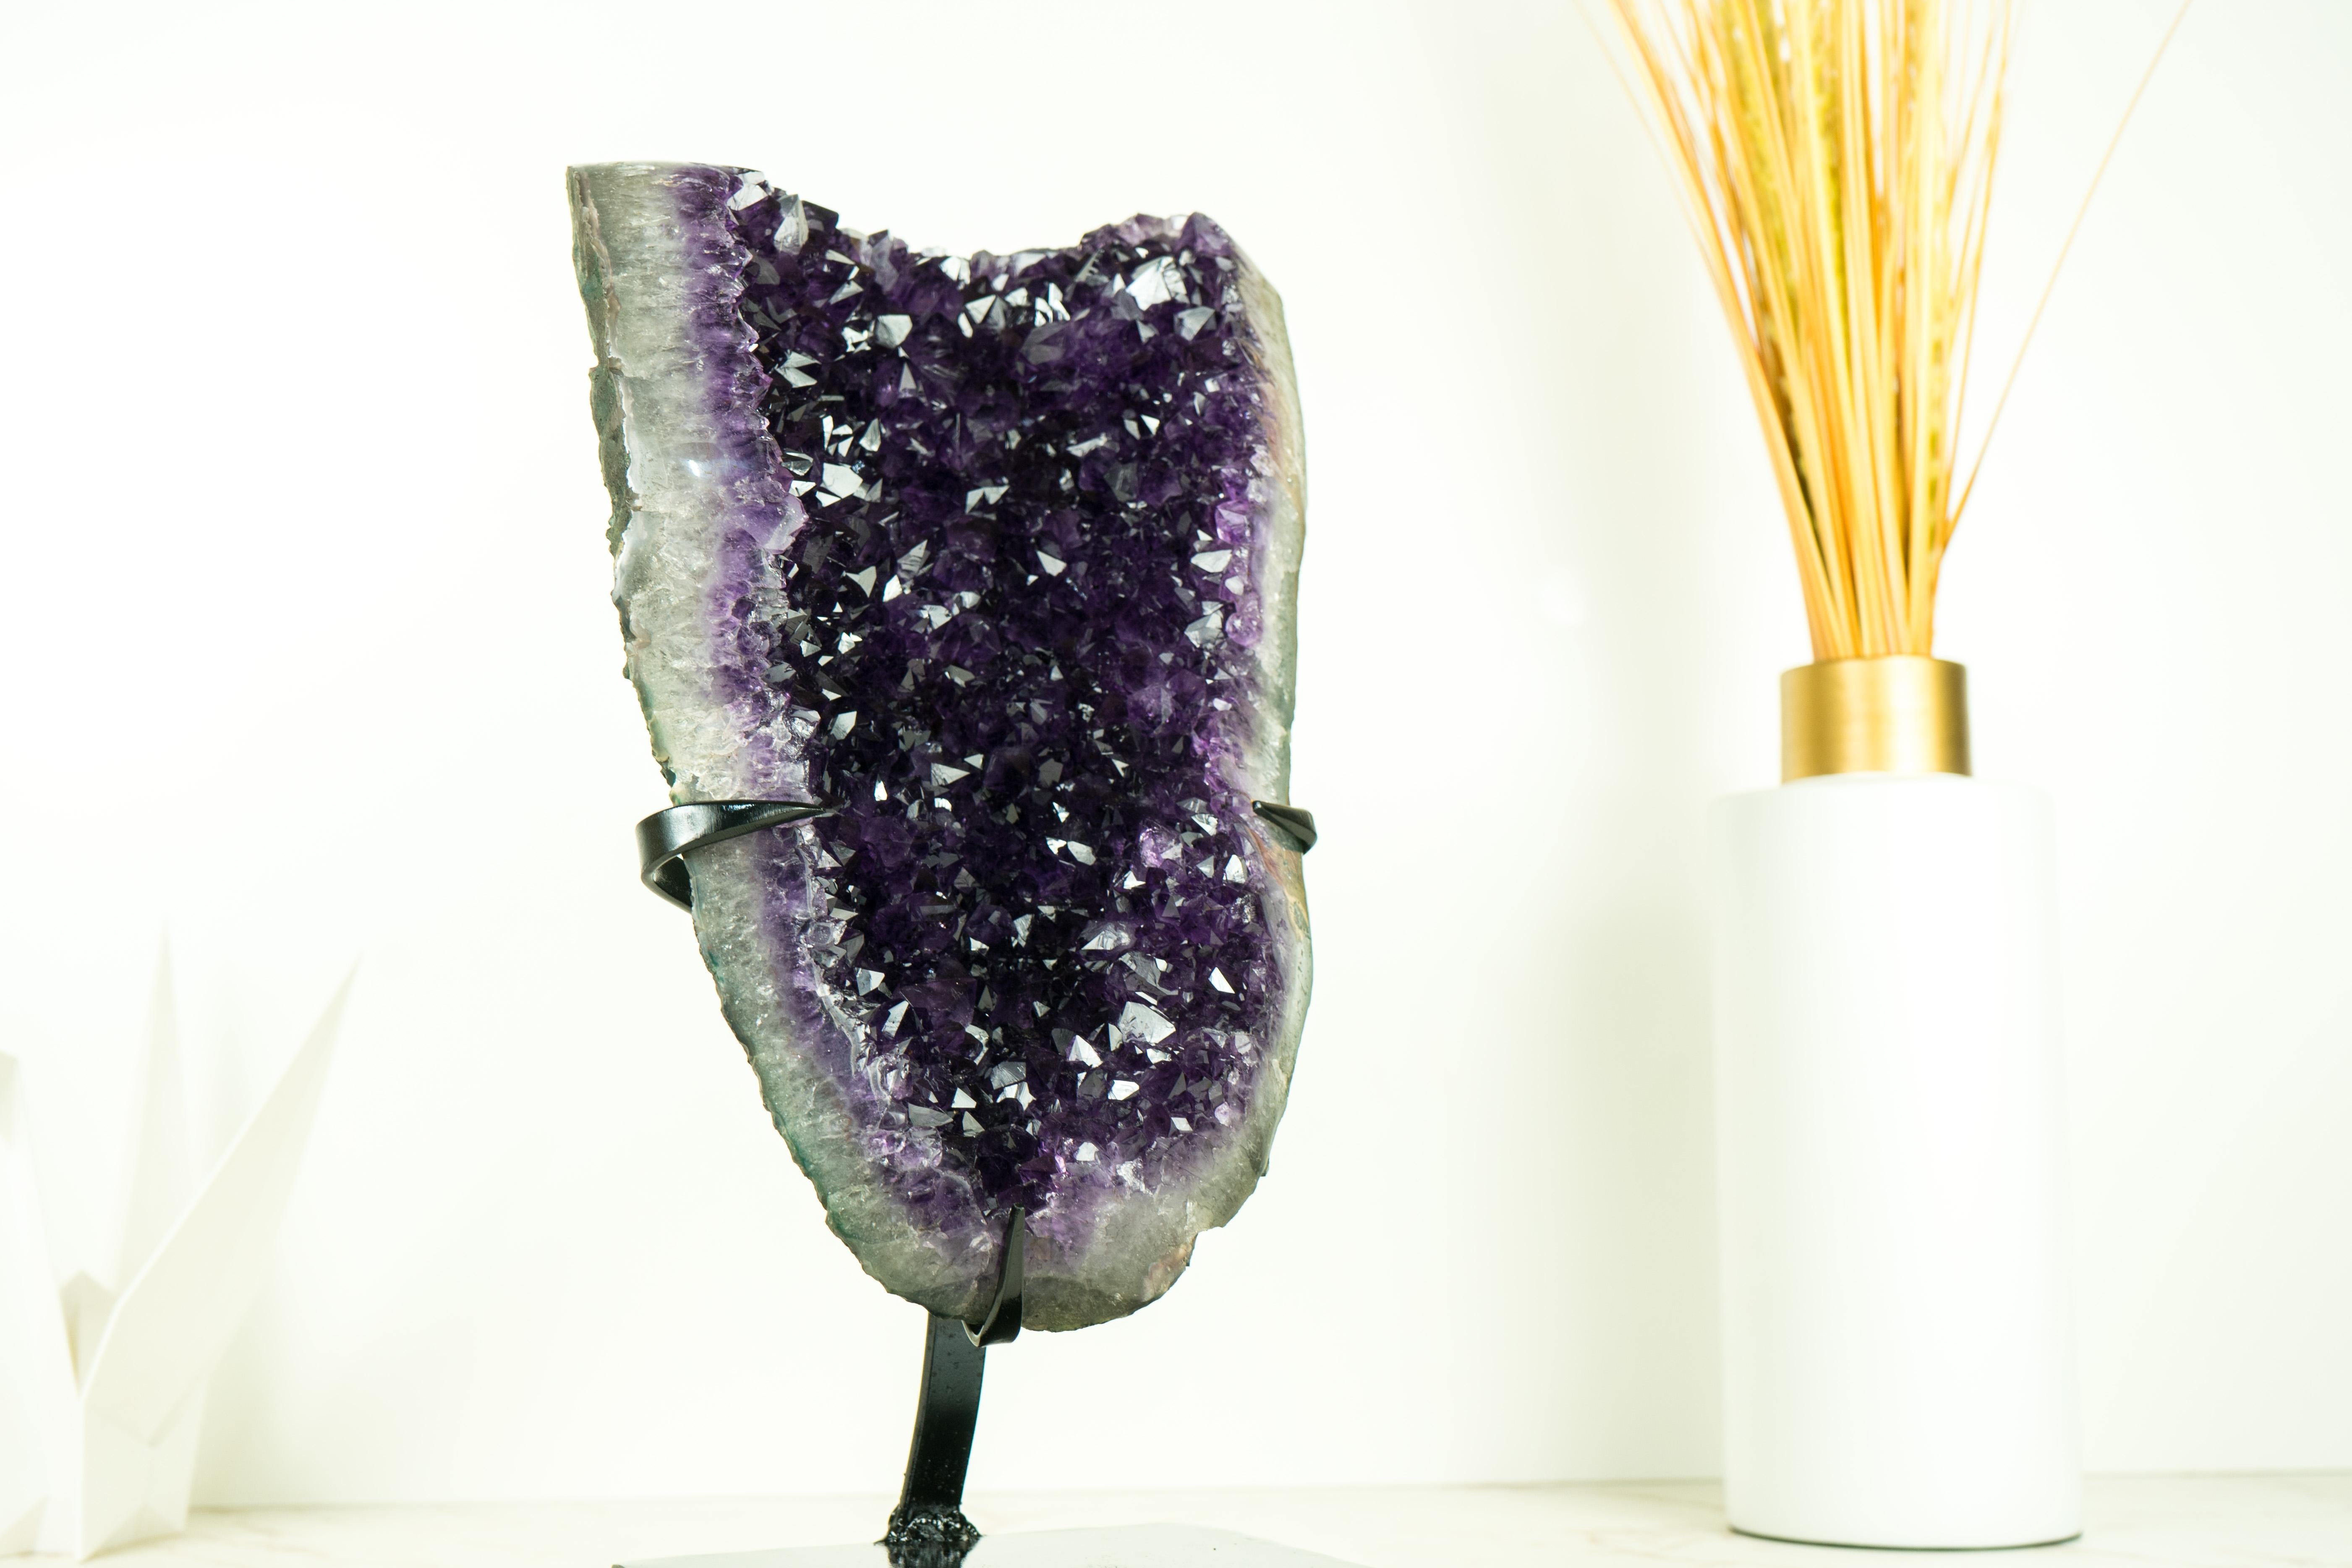 High-Grade Amethyst Cluster with Saturated Grape-Jelly Amethyst Druzy: A Luxurious Gemstone Display

▫️ Description
A remarkable High-Grade Amethyst Cluster features world-class qualities, with its deep, rich purple tone known as Grape Jelly, making